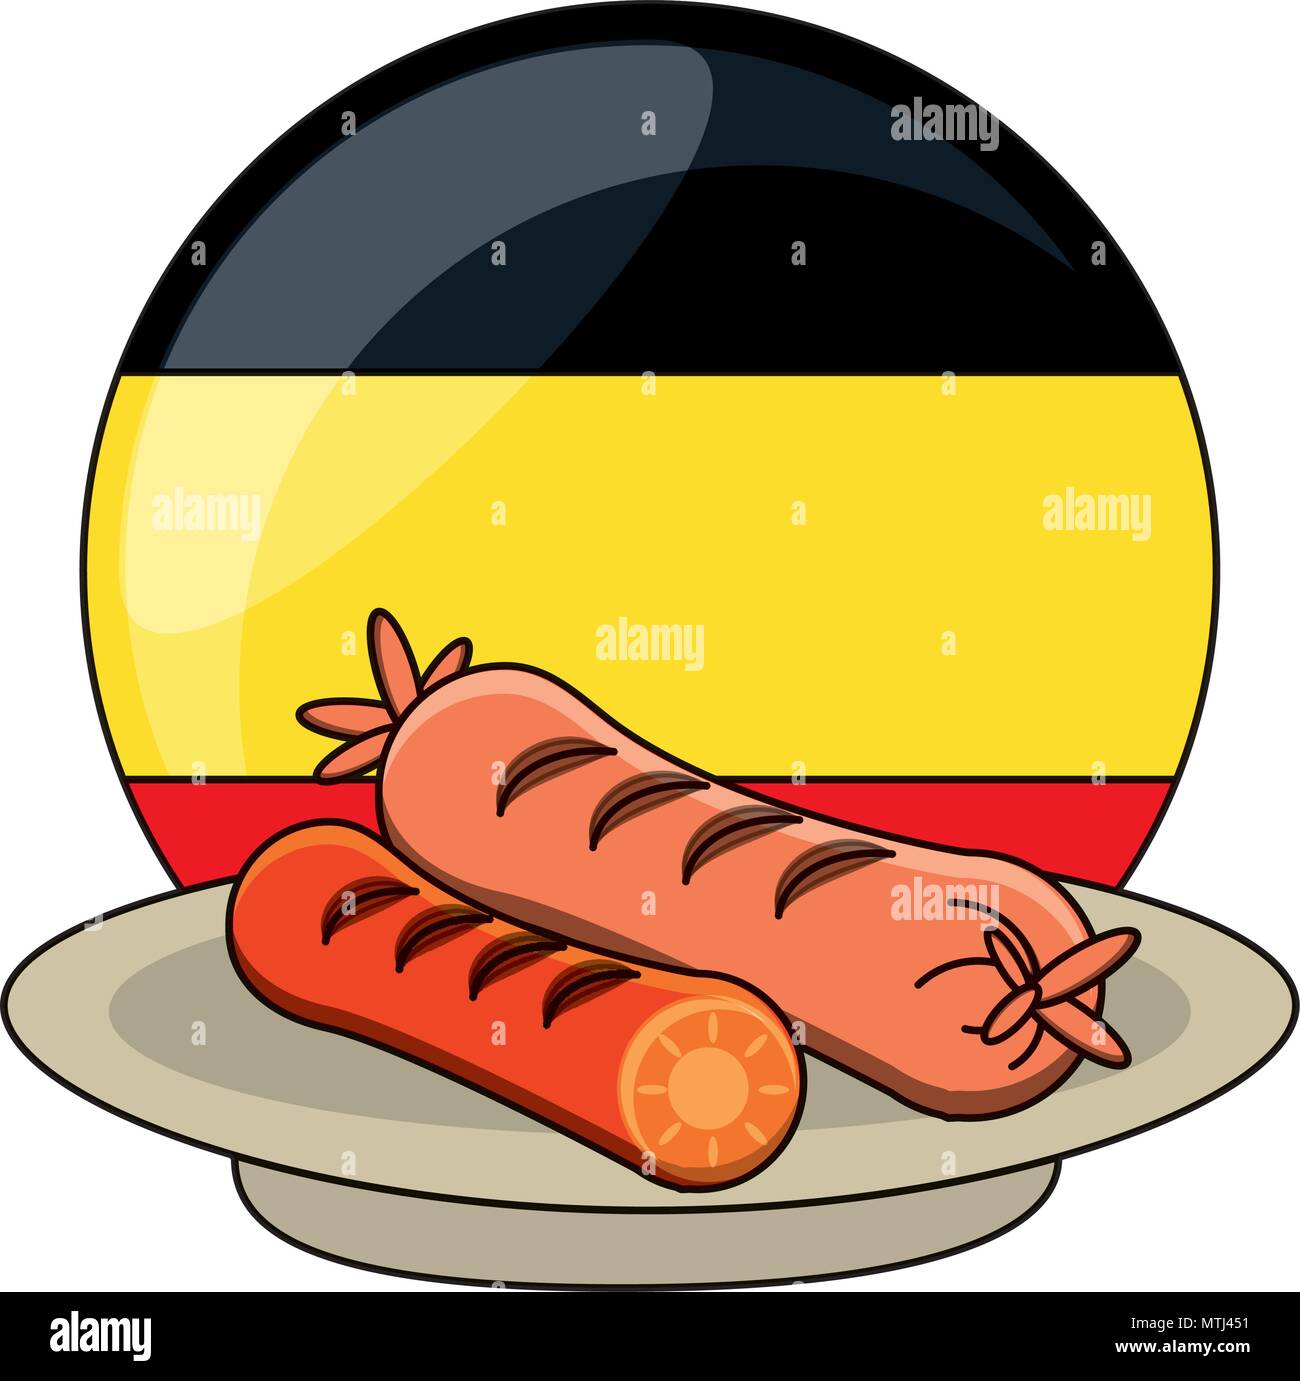 german flag and dish with sausages over white background, vector illustration Stock Vector